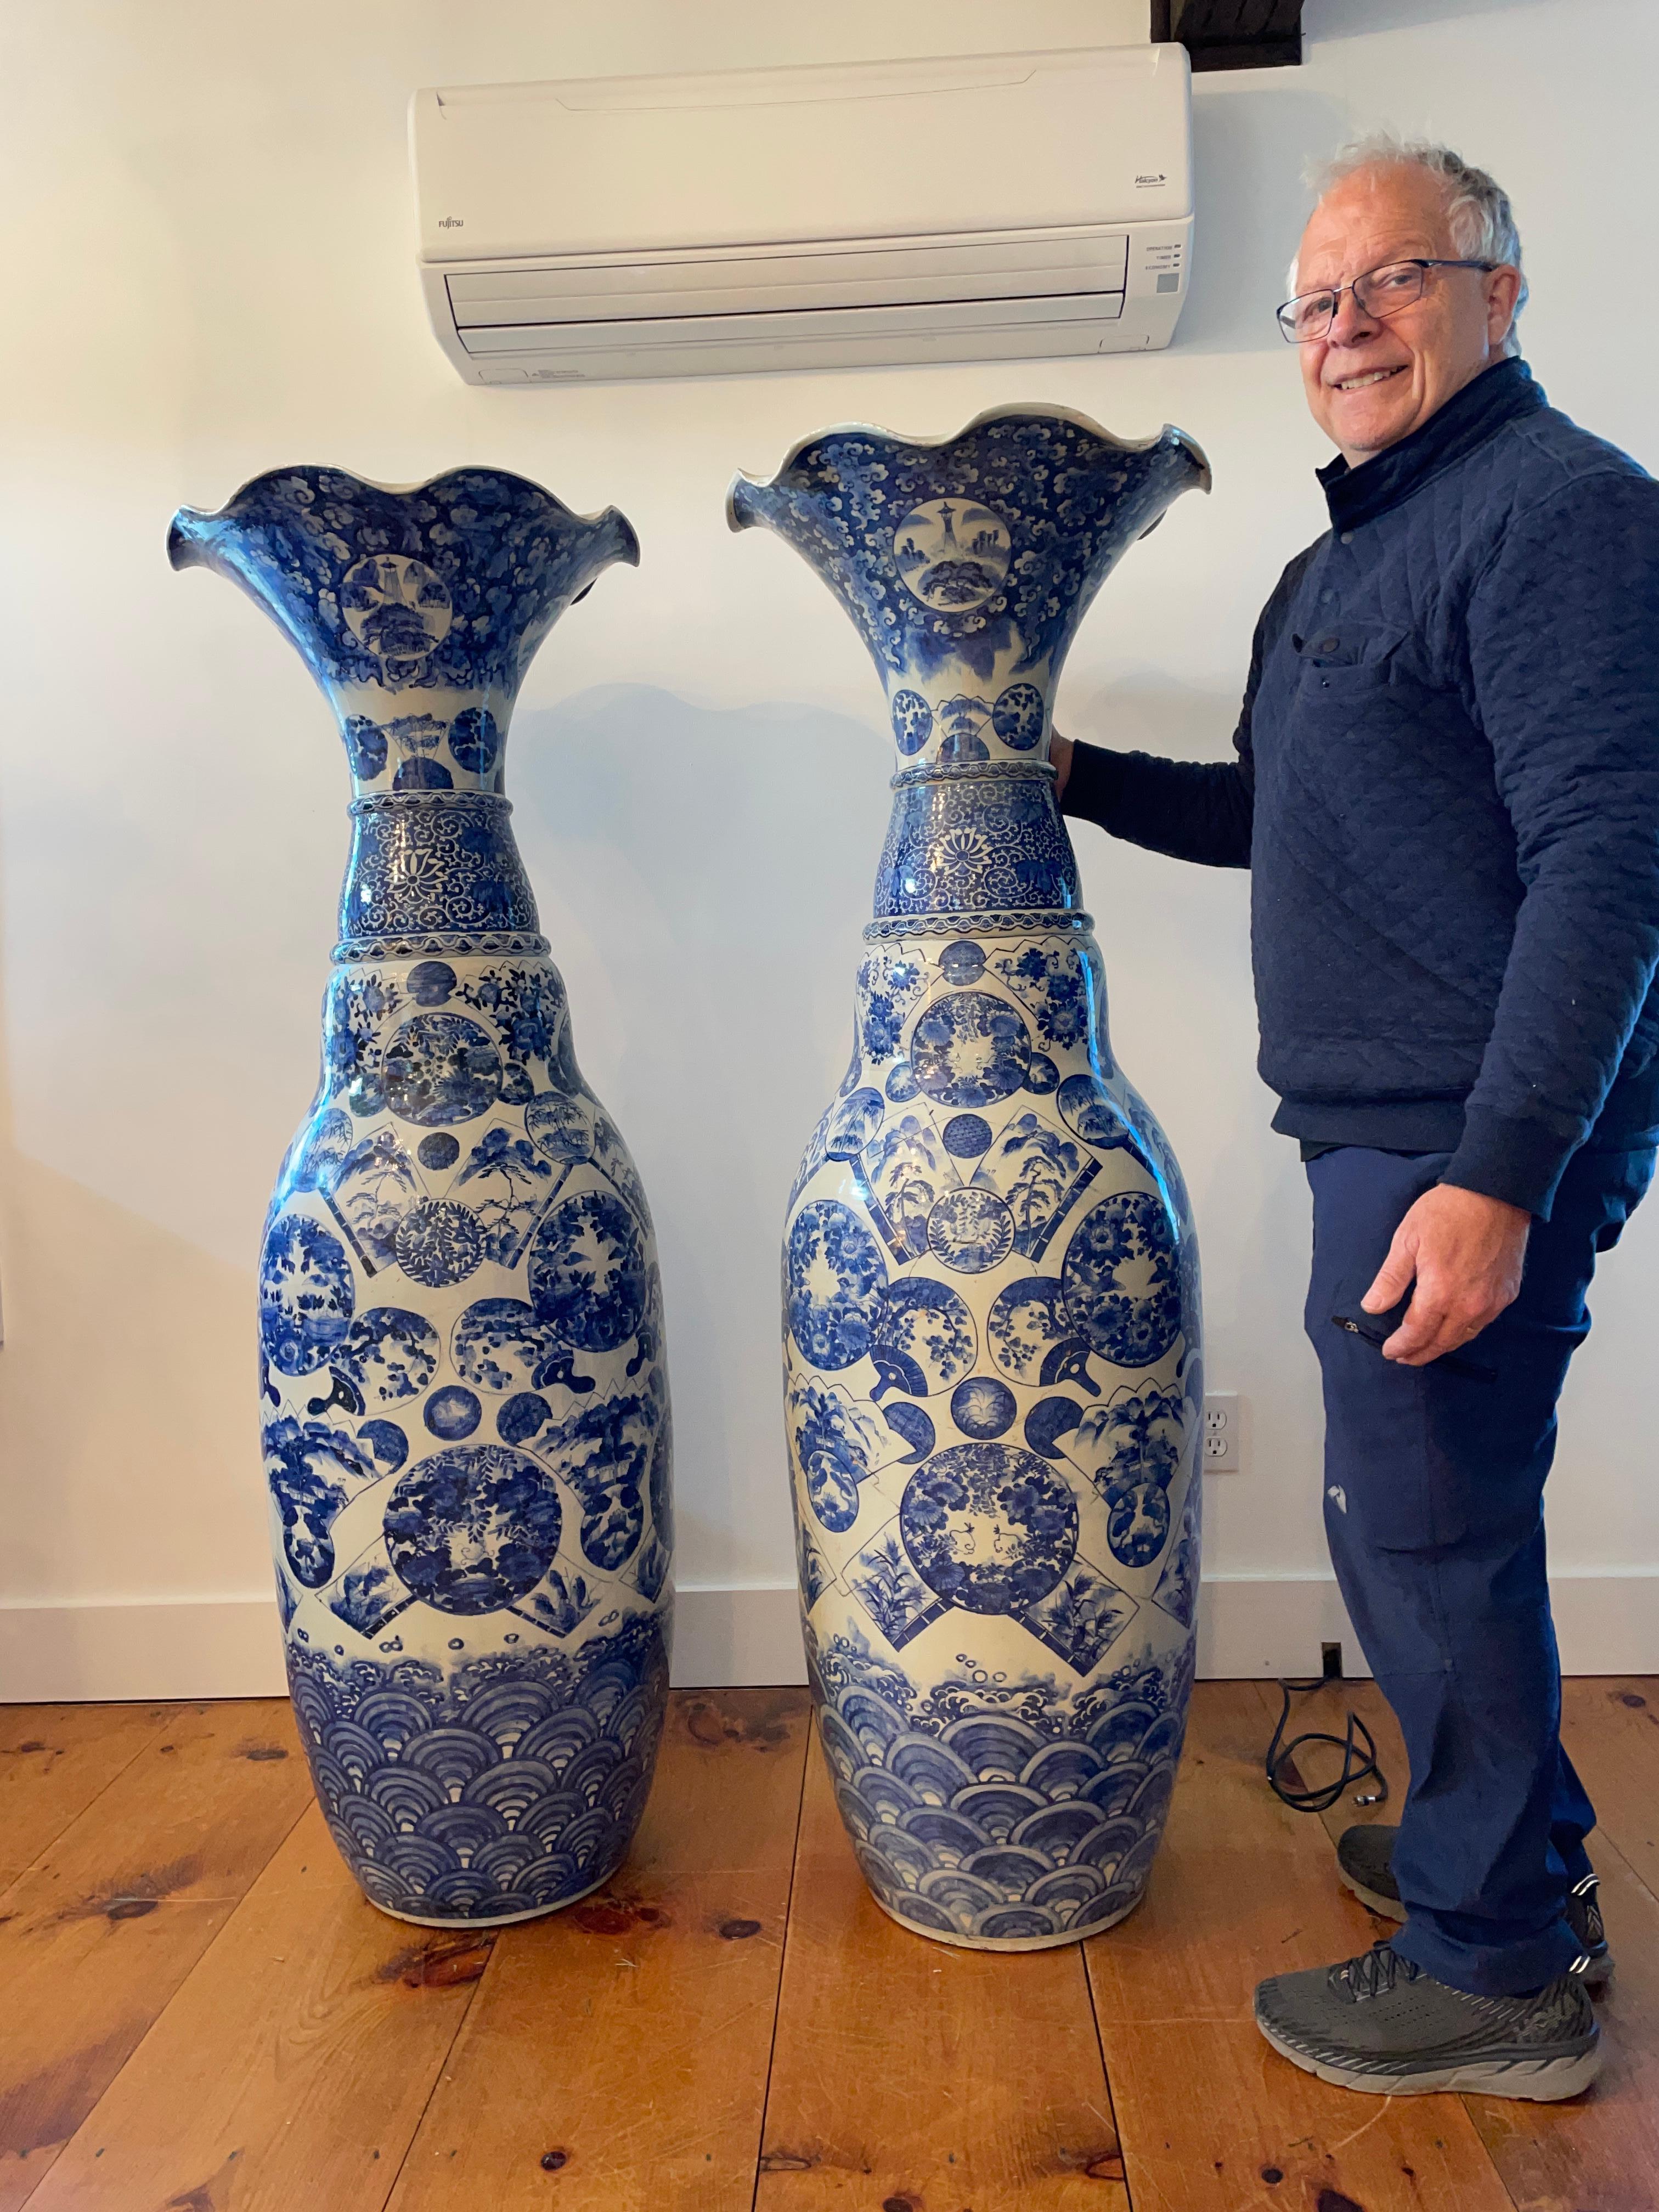 From An impeccable American Provenance:
Estate of Otis Elevator Family Descendant Elisha Graves Otis

Japanese pair (2) , 19th century Meiji period Imari Arita Yaki blue and white porcelain palace scale vases hand painted in cobalt under glaze in an